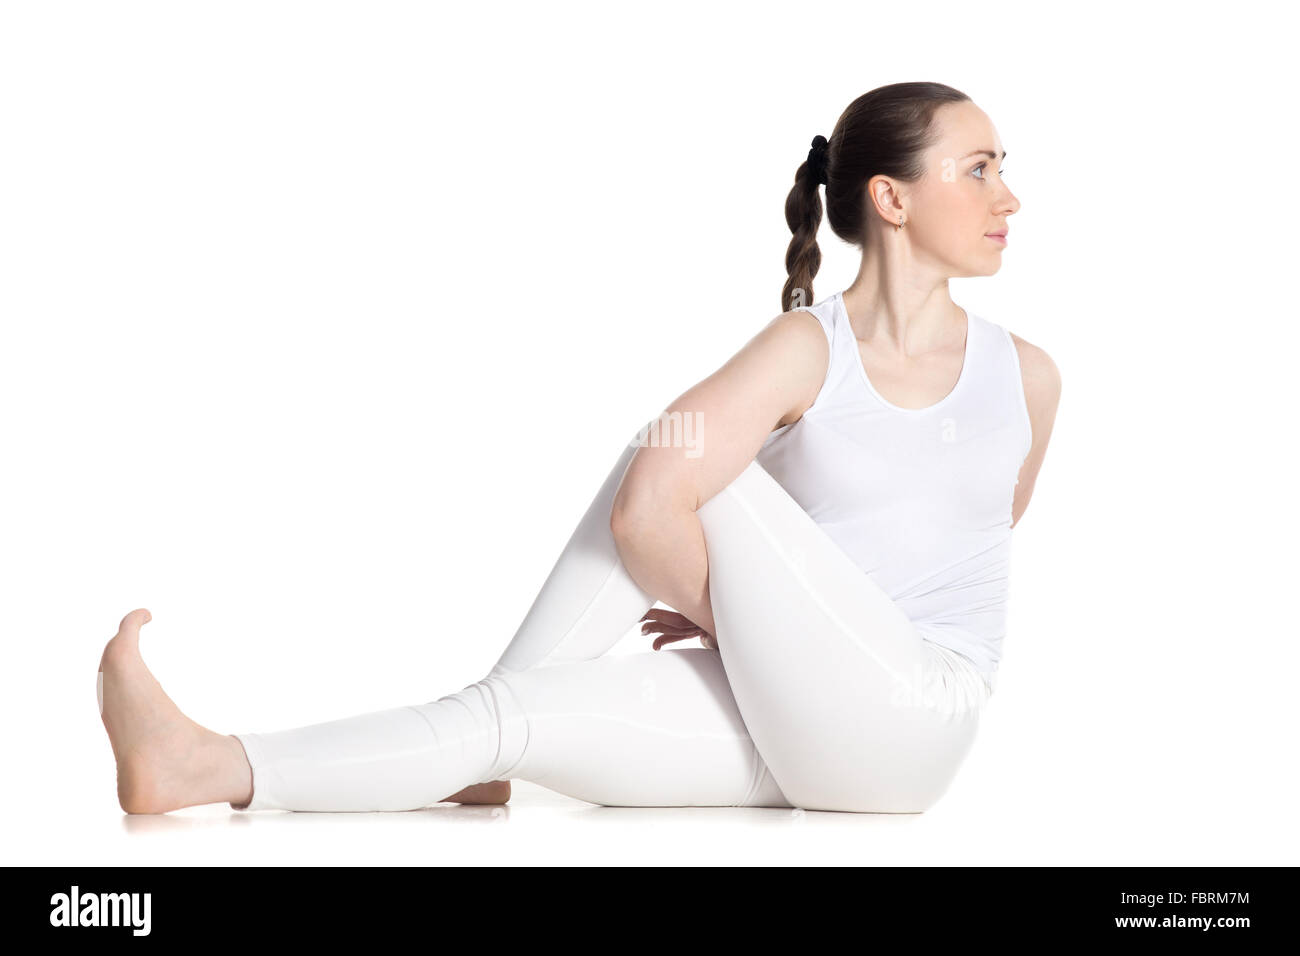 Elements Massage - Supta Vakrasana – Reclining Spinal Twist Pose: Lie on  the mat in supine position with your legs stretched out, hands resting on  the sides. Bend your knees, making a